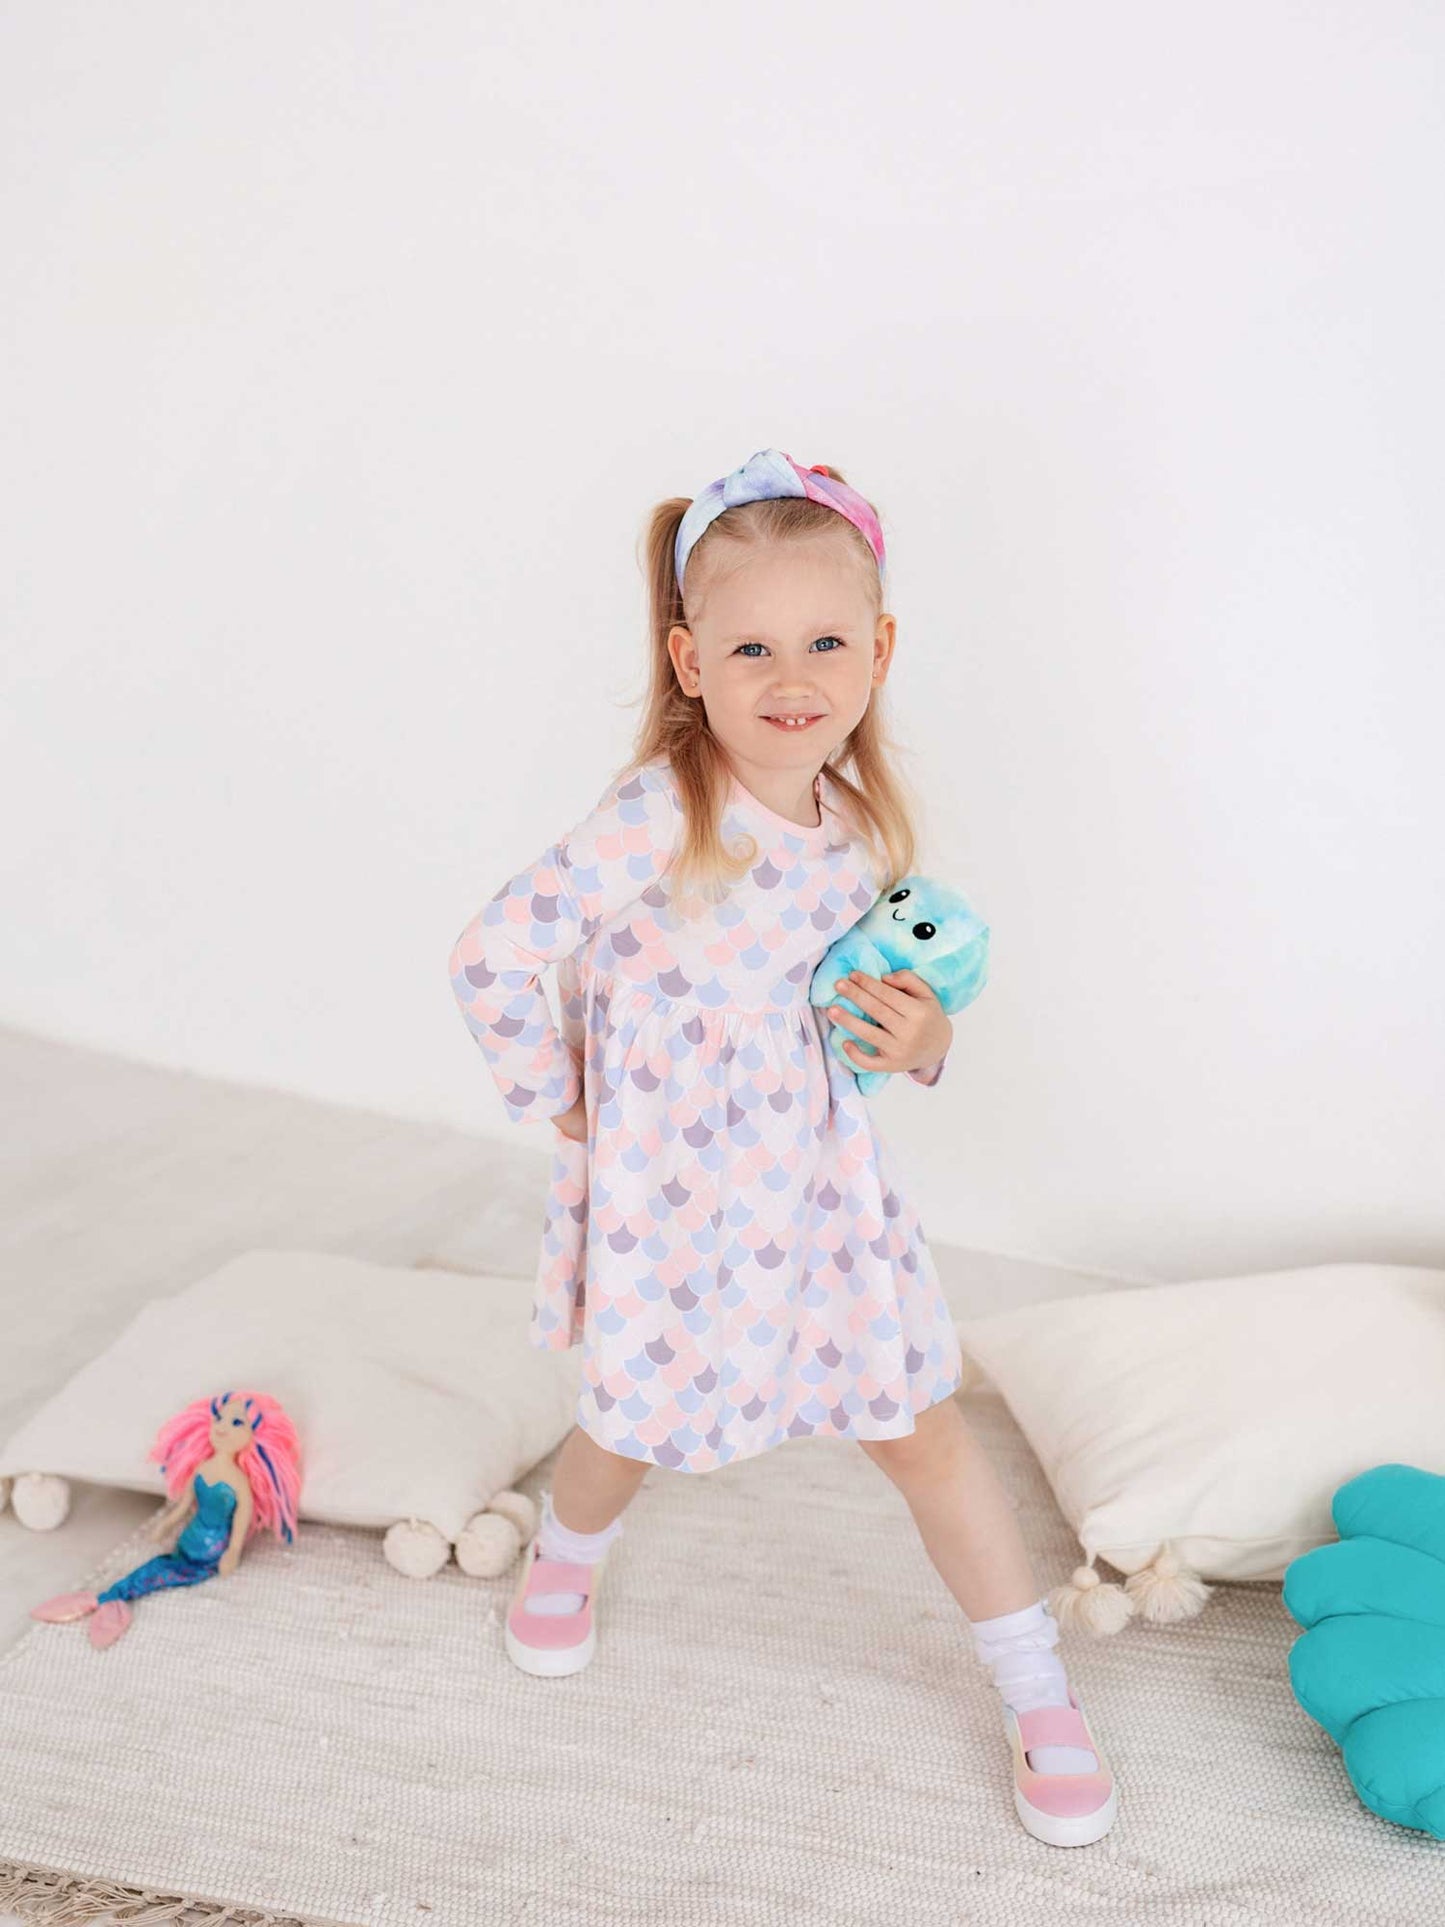 Baby Dress Gold Fish 325 features a blend of cotton and elastane for just the right amount of flexibility and comfort, making it an ideal everyday dress as well as when travelling out of the house.